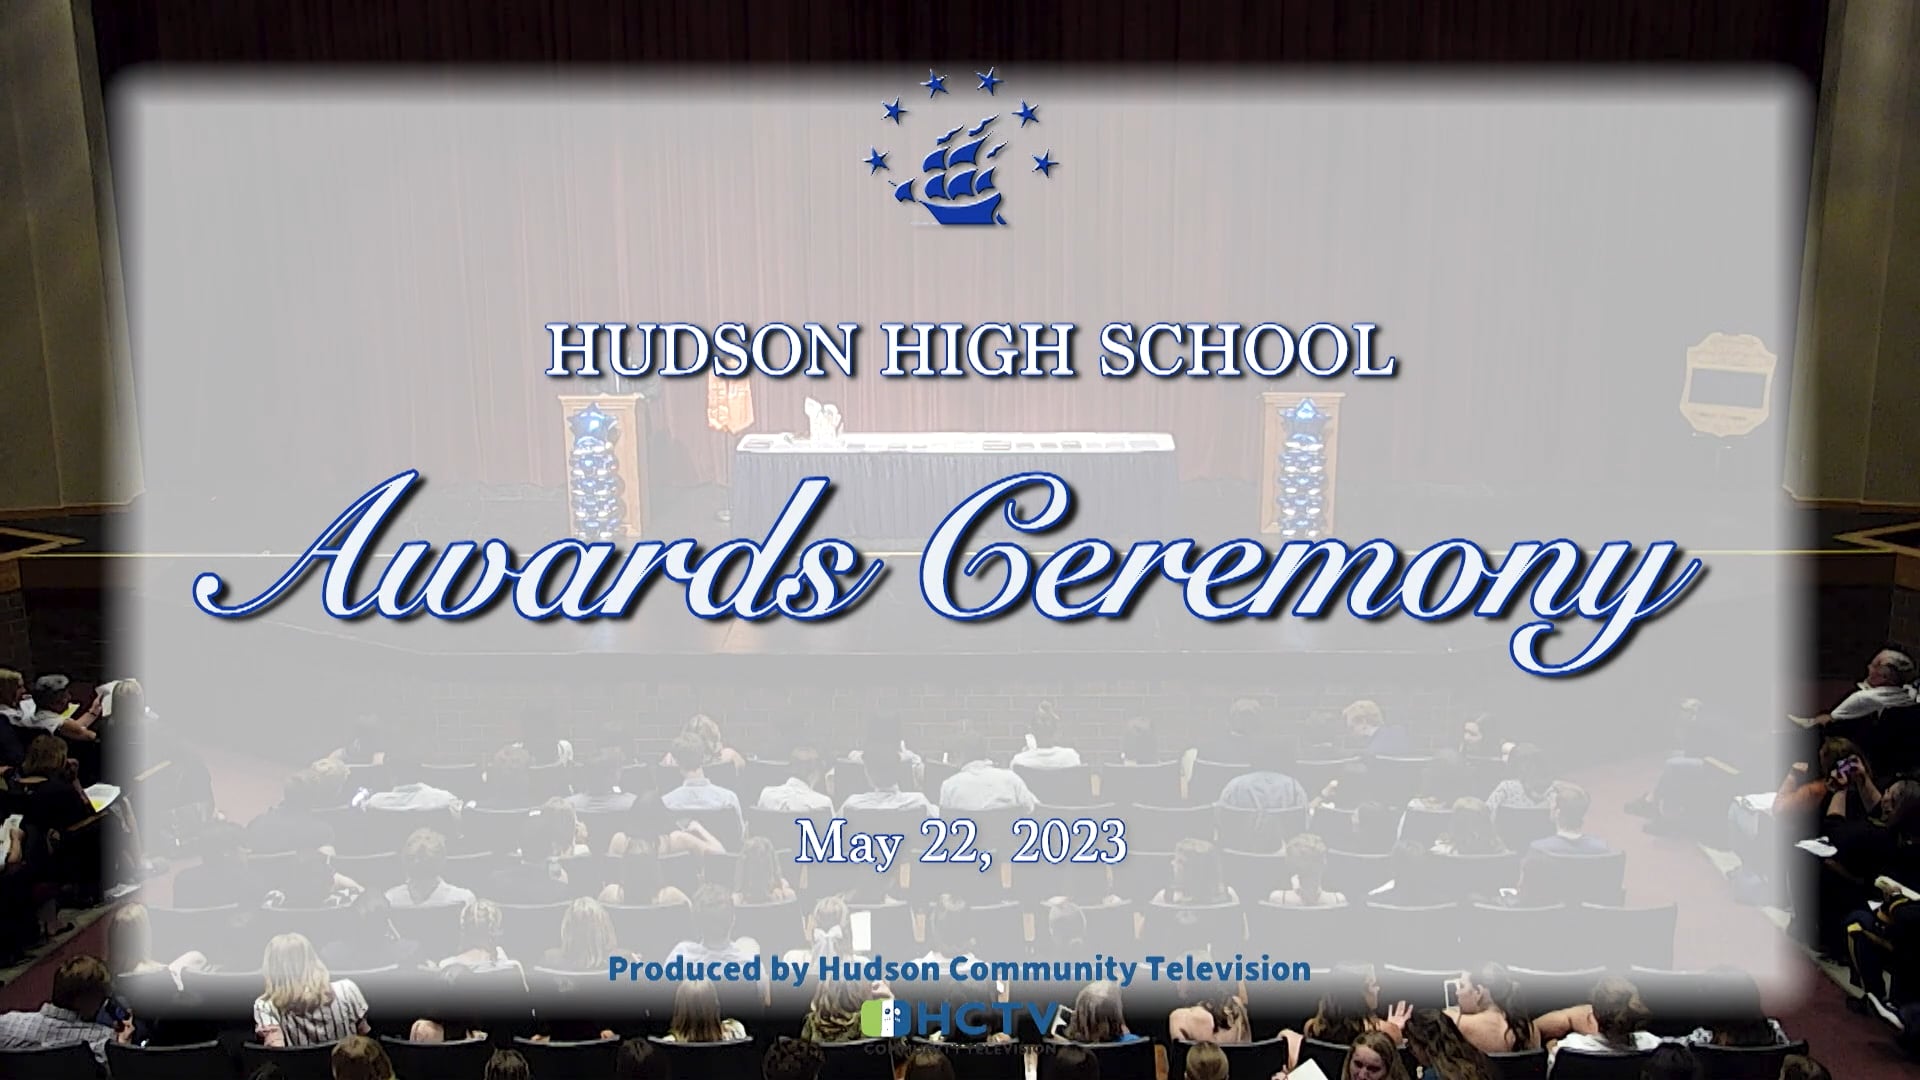 HHS Awards Ceremony - May 22, 2023